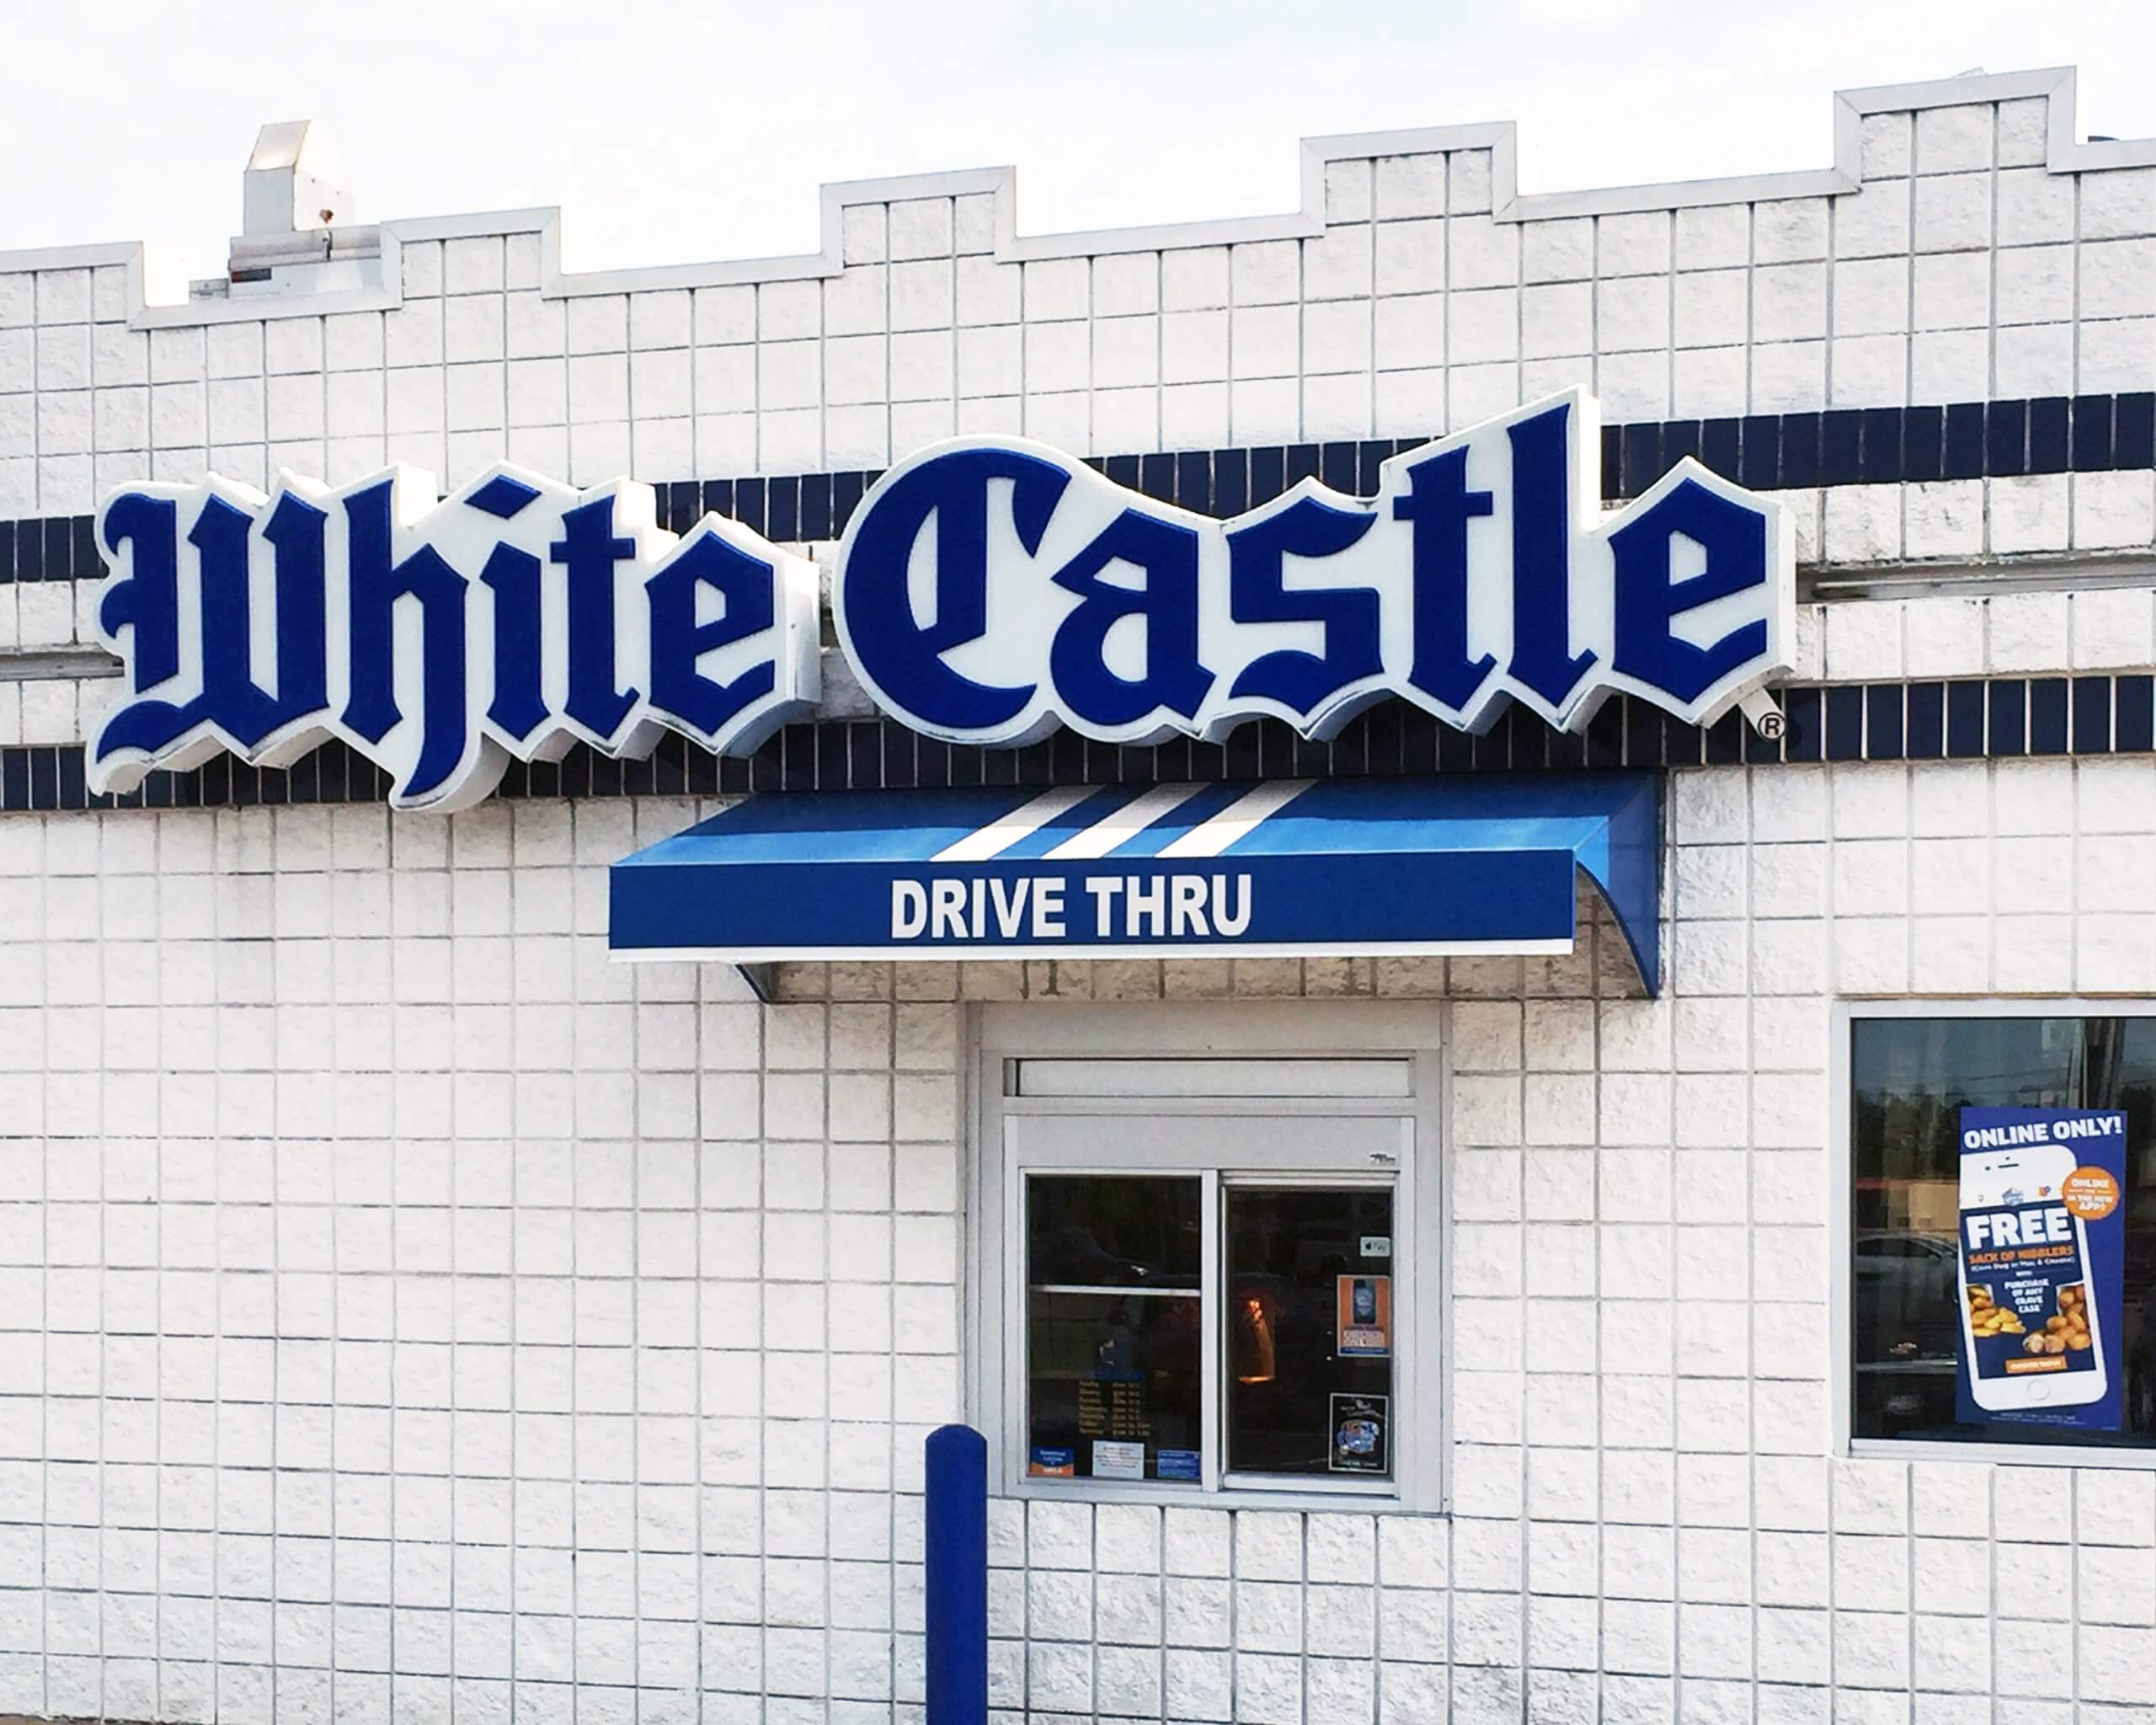 Mastercard teamed up with SoundHound to bring 'voice payments' to White Castle drive-thrus